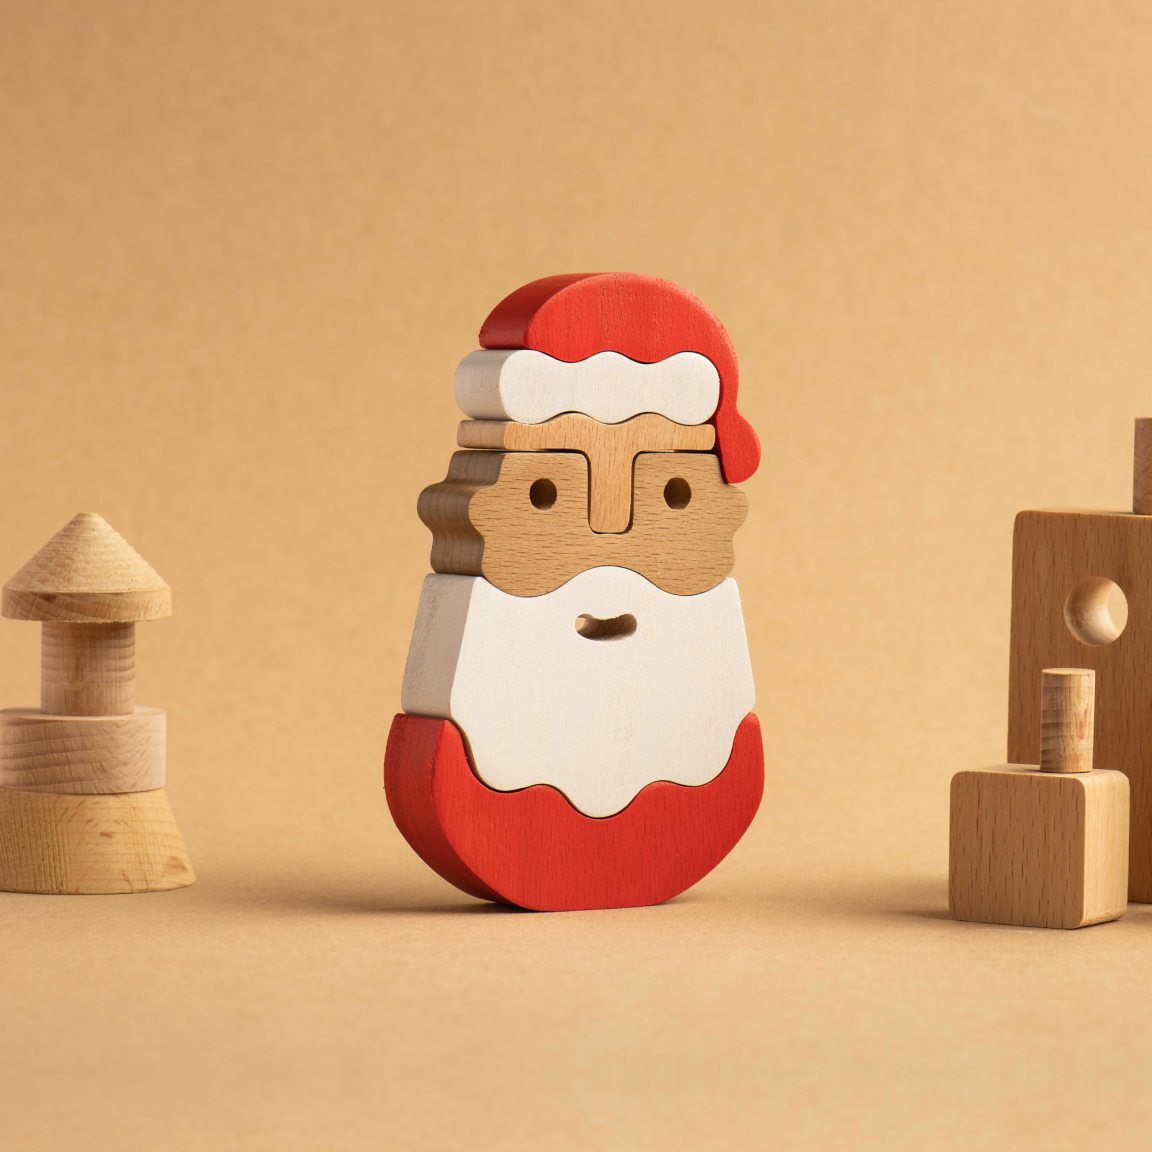 Small stacking toy: "Santa Claus"